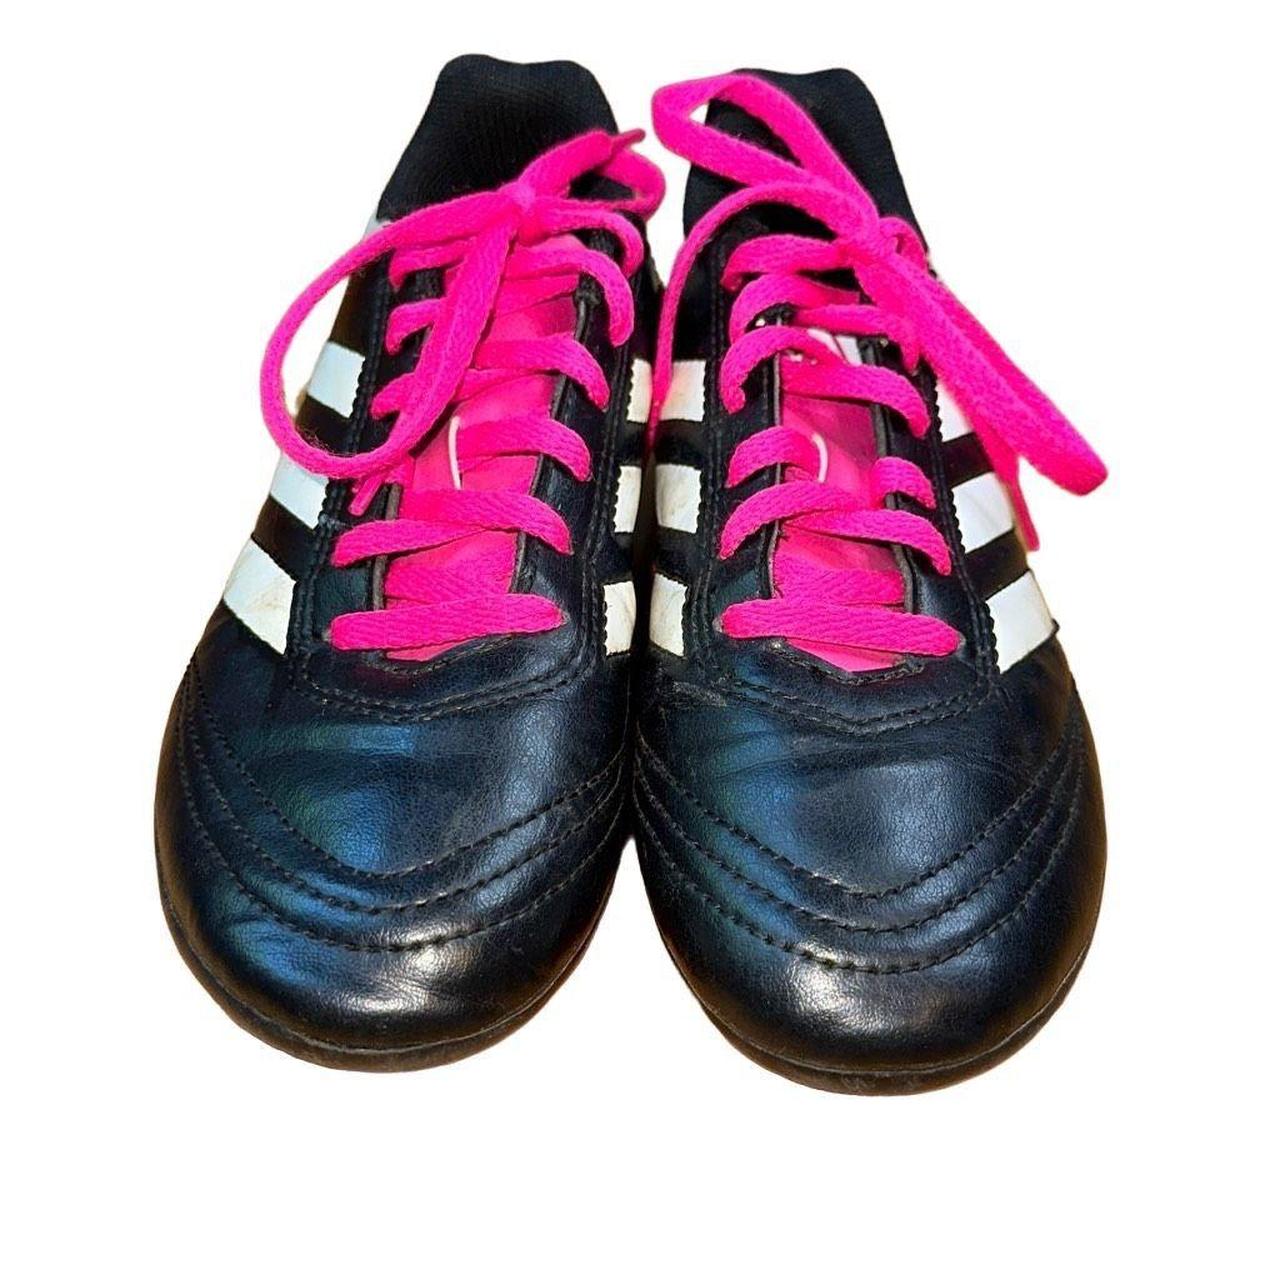 Adidas Black and Pink Trainers | Depop